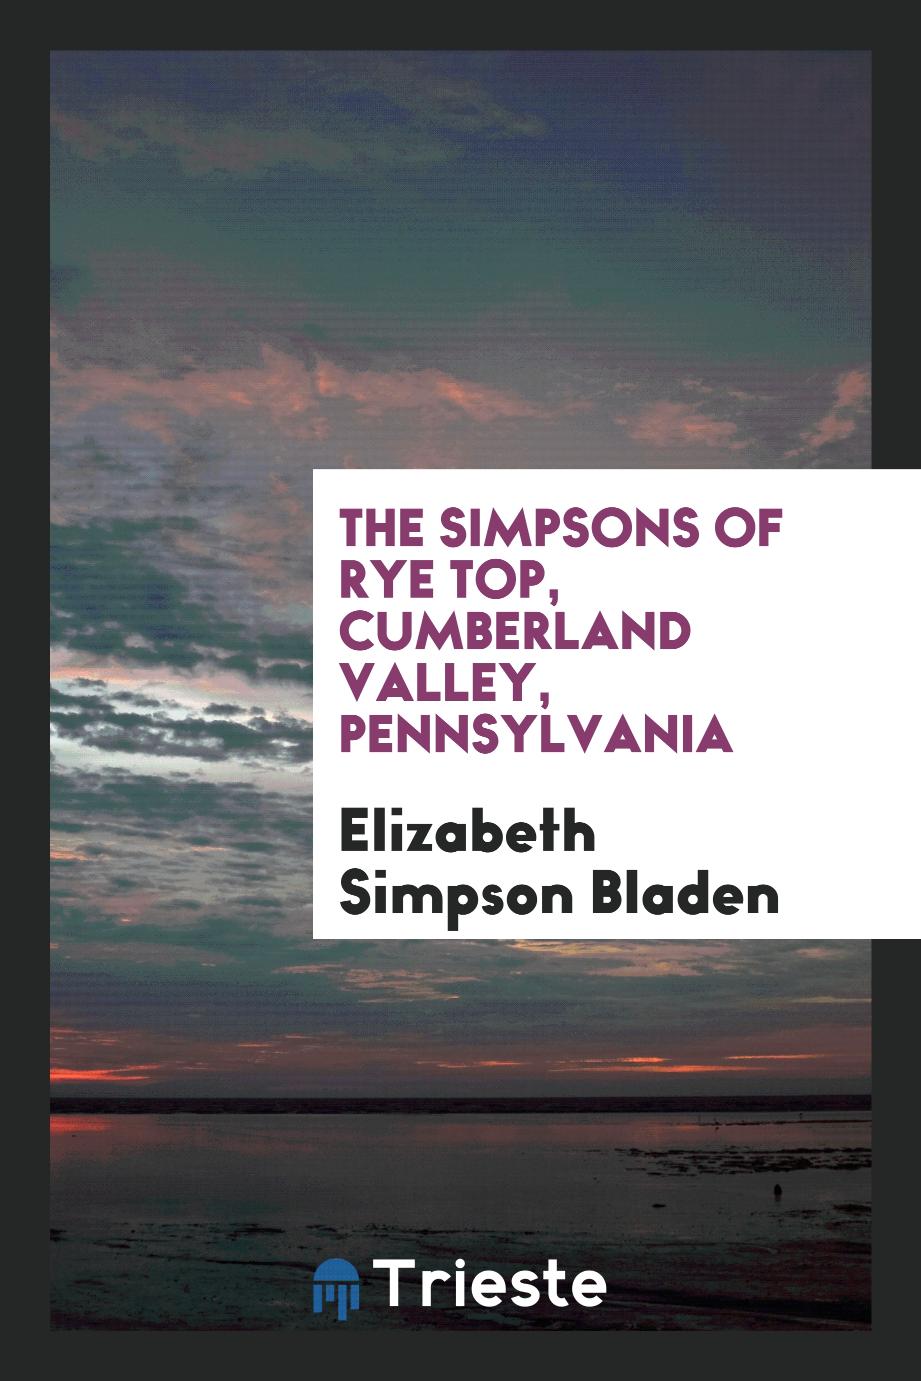 The Simpsons of Rye Top, Cumberland Valley, Pennsylvania